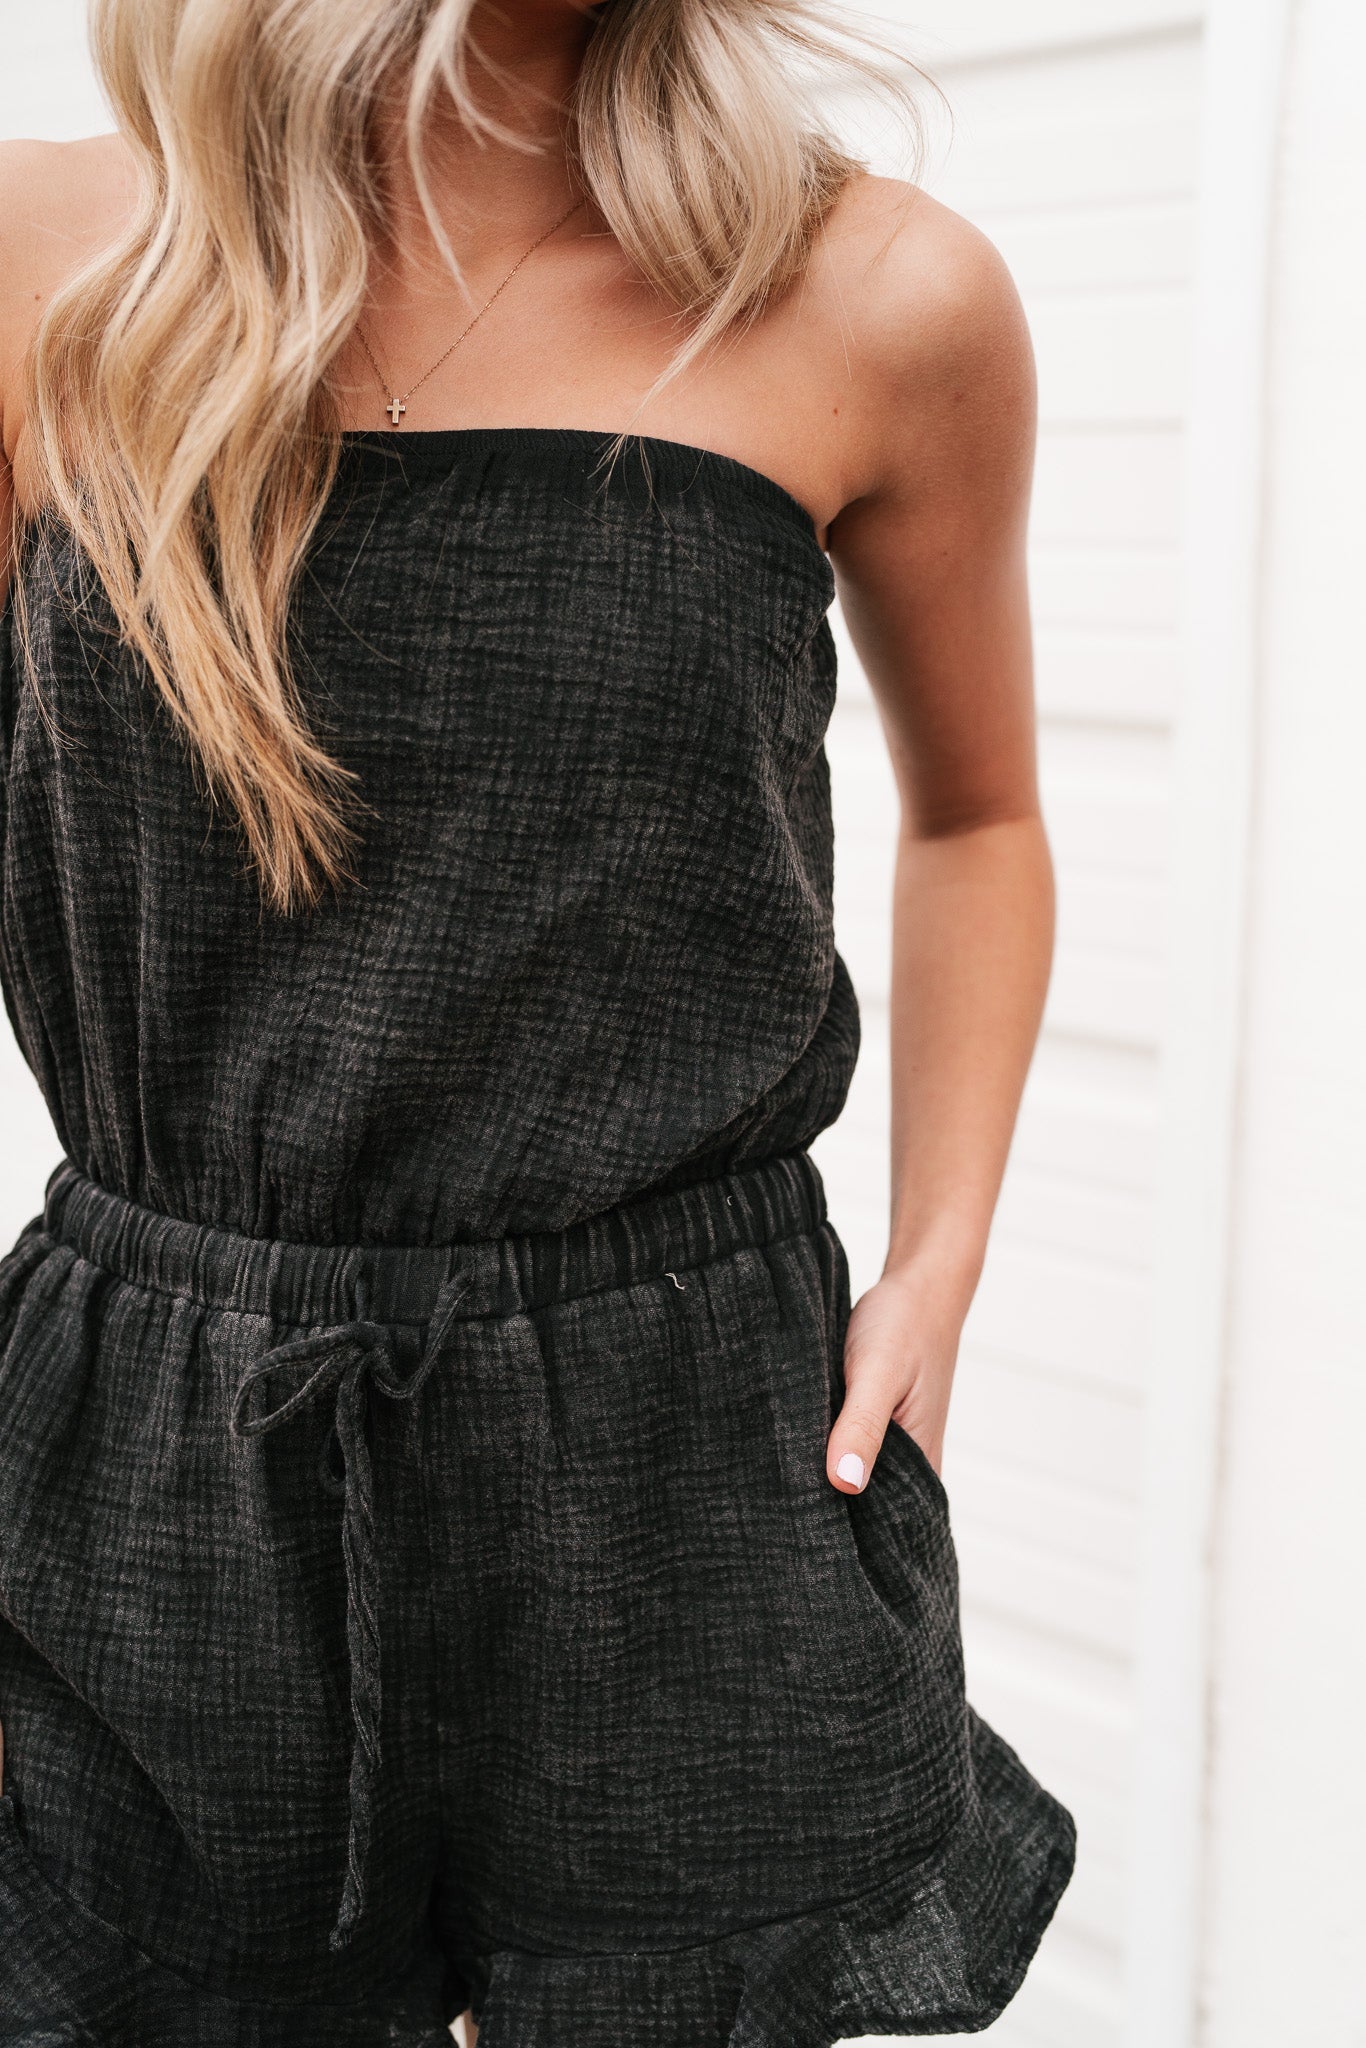 Remind Me Later Strapless Romper